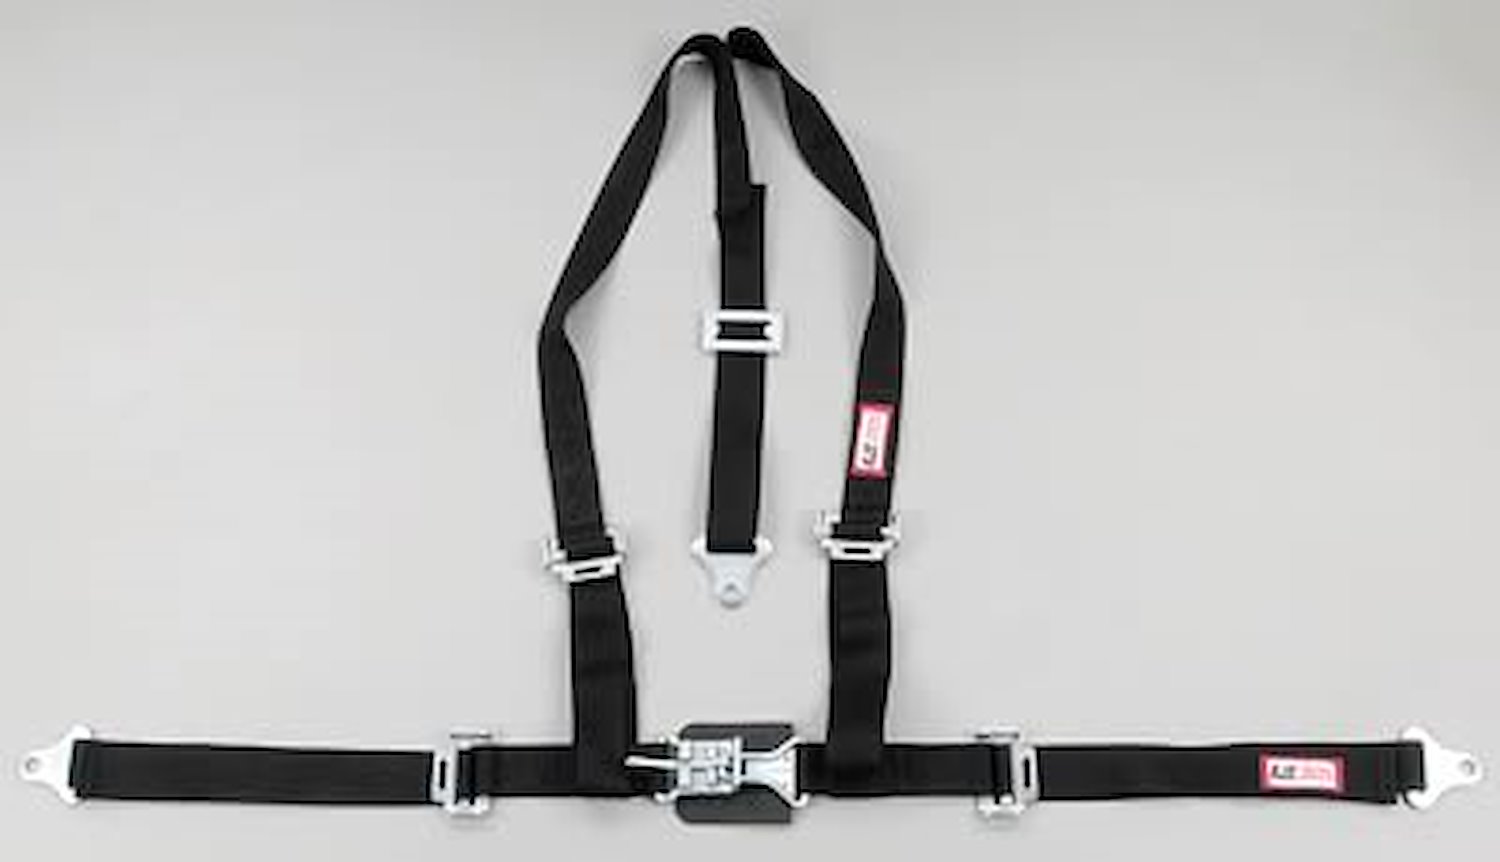 NON-SFI L&L HARNESS 2 PULL UP Lap Belt SNAP SEWN IN 2 S.H. INDIVIDUAL FLOOR Mount WRAP/BOLT PURPLE